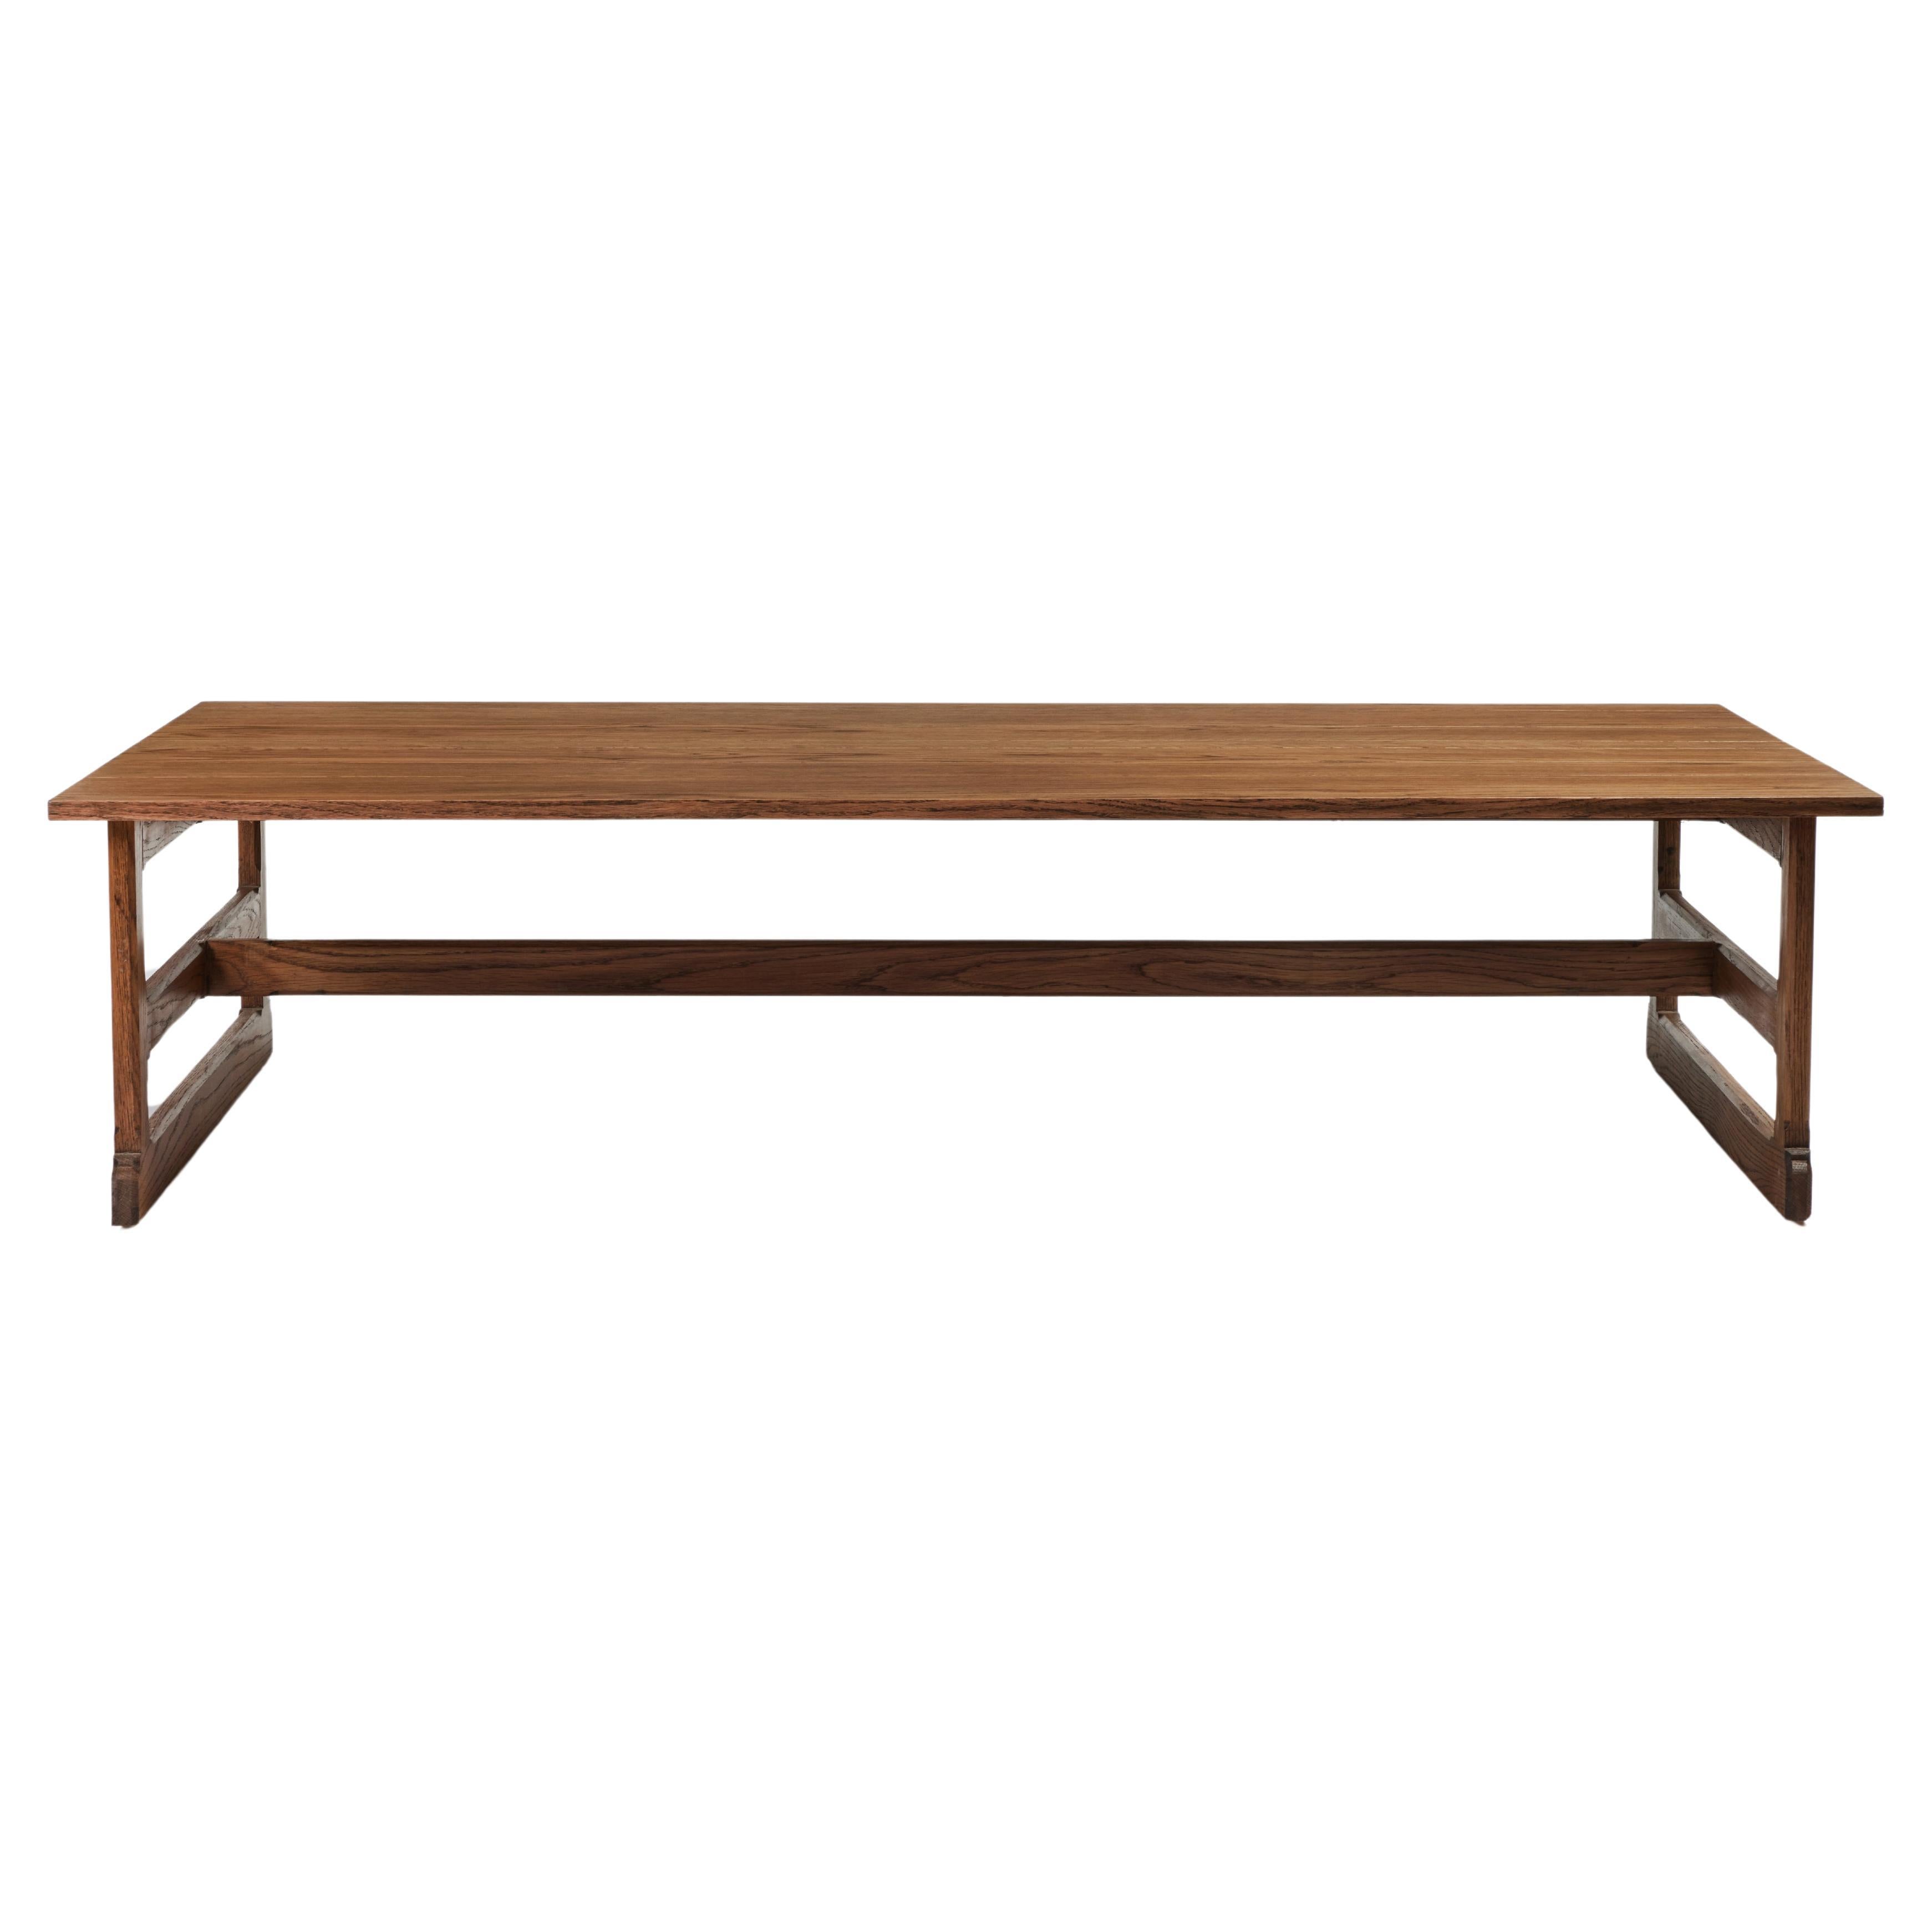 Martin & Brockett's West Large Trestle Console features a modern craftsman style and a rustic sinewy frame with hand carved details and a planked top. Shown here in our Tanned finish on Oak. 

Part of our West Trestle Collection. Other finishes and